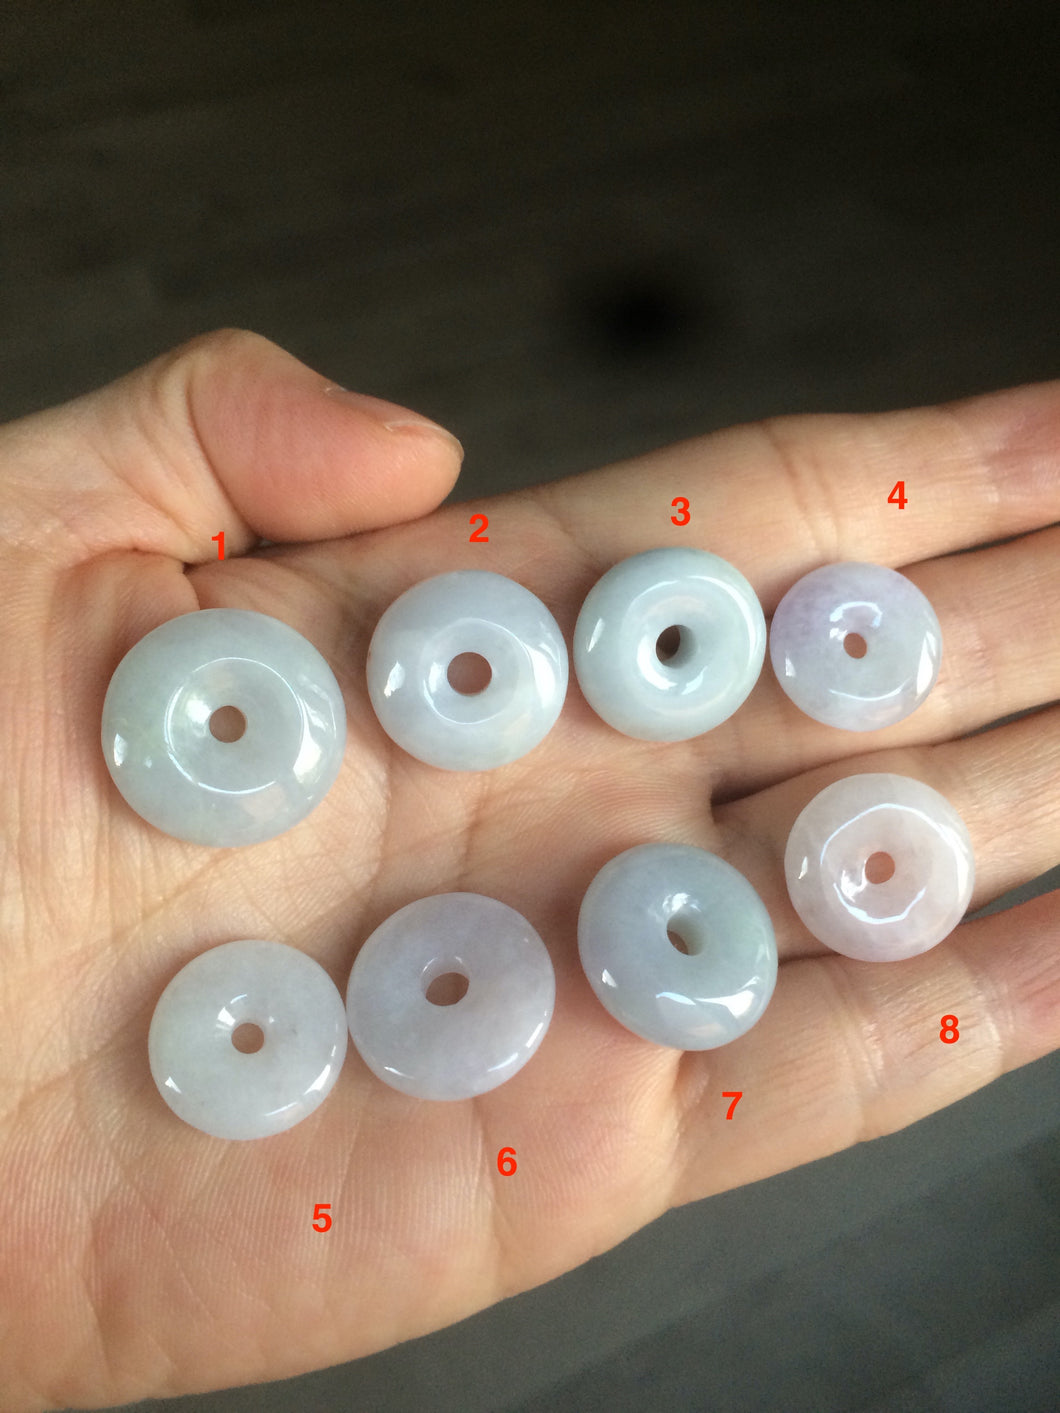 16.5-19.8mm Type A 100% Natural light purple/white Jadeite Jade Safety Guardian Button donut Pendant group AT71 add on item